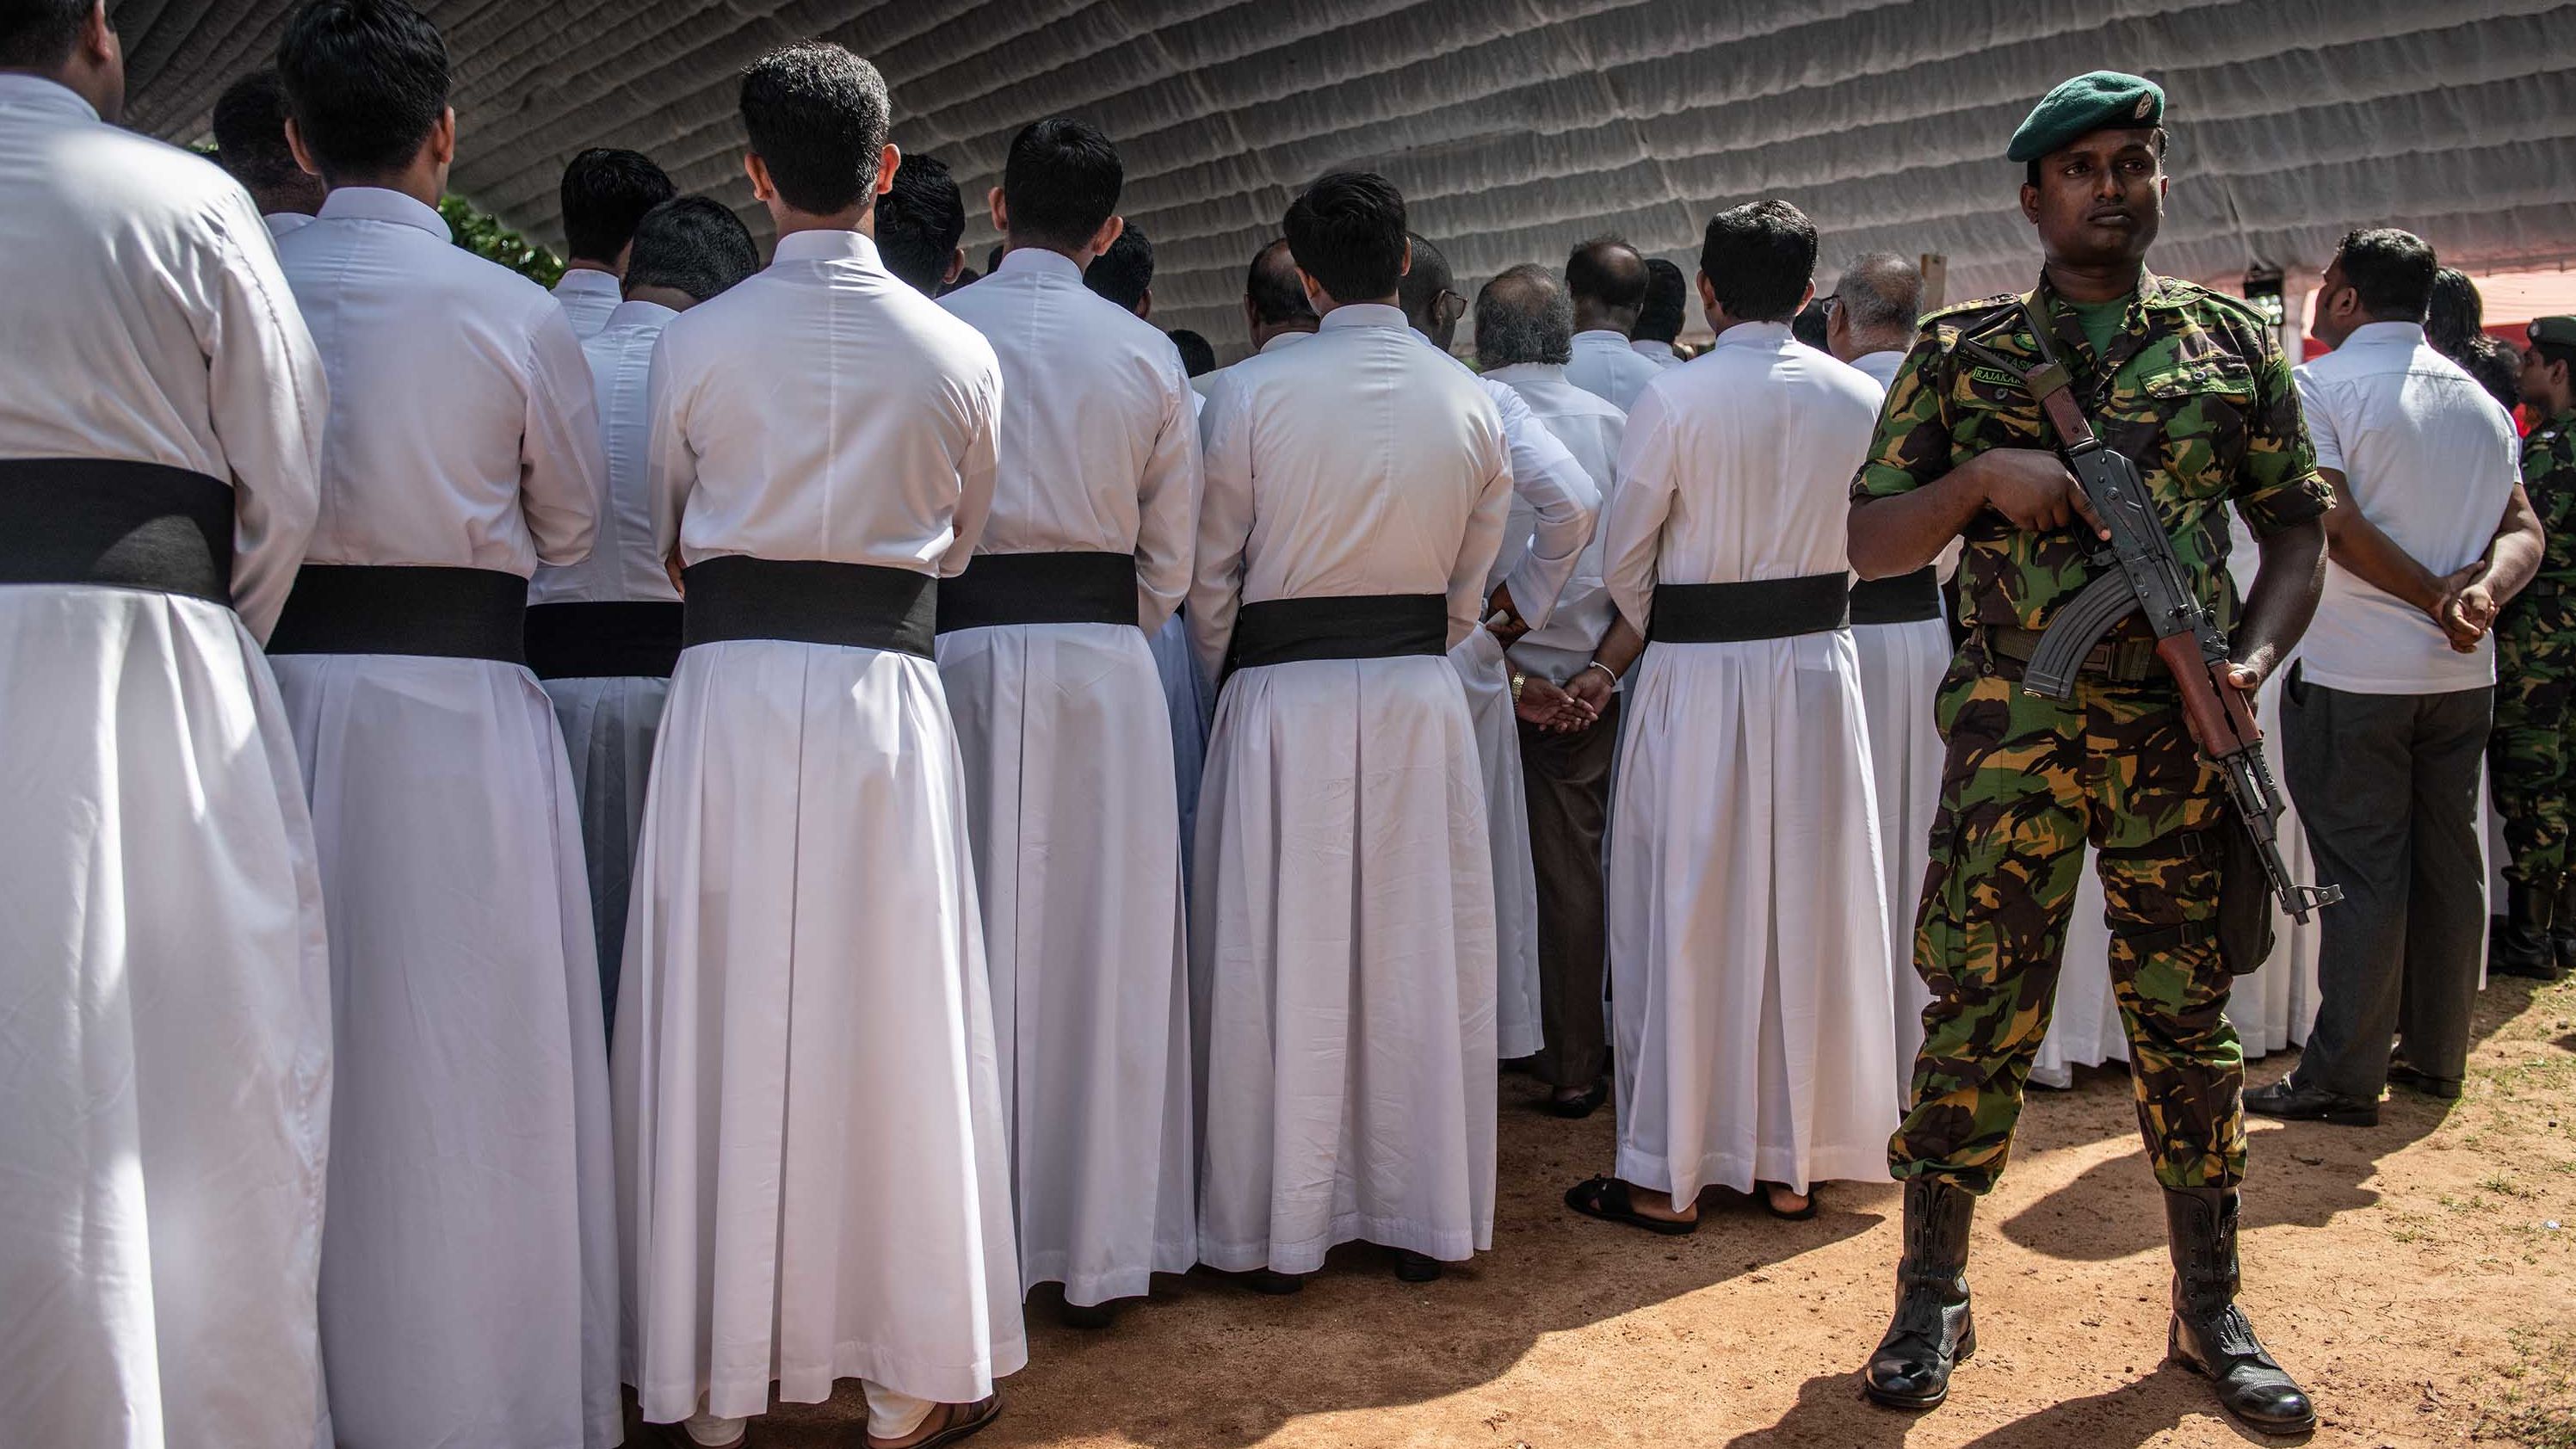 A soldier stands guard next to members of the clergy during a mass funeral in Negombo on Tuesday.